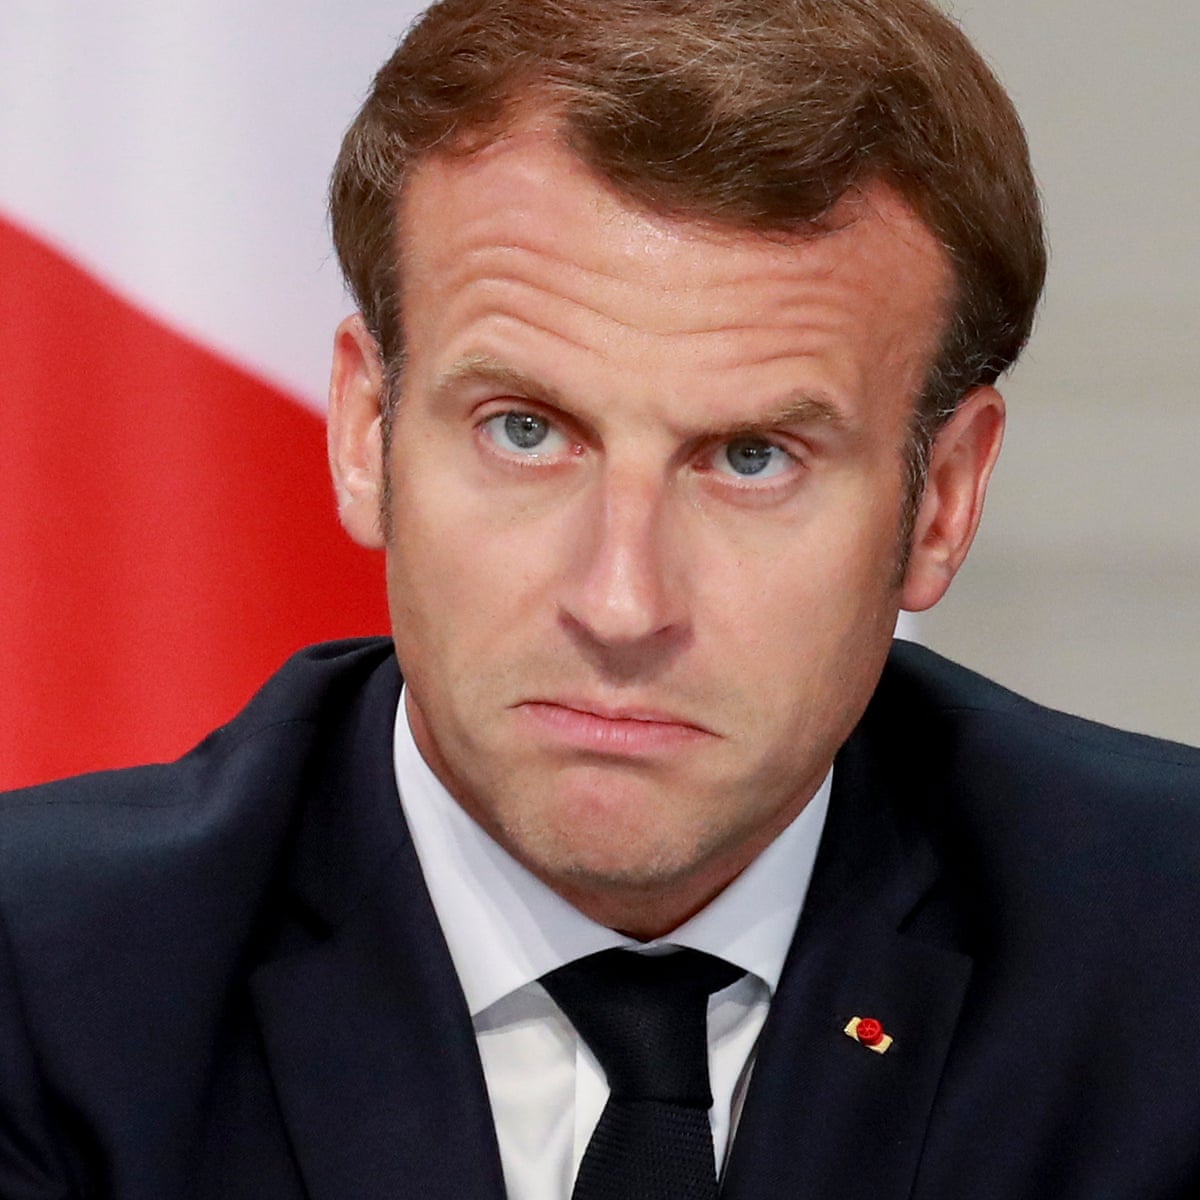 watch-france-president-emmanuel-macron-clapped-in-the-face-bustoptv